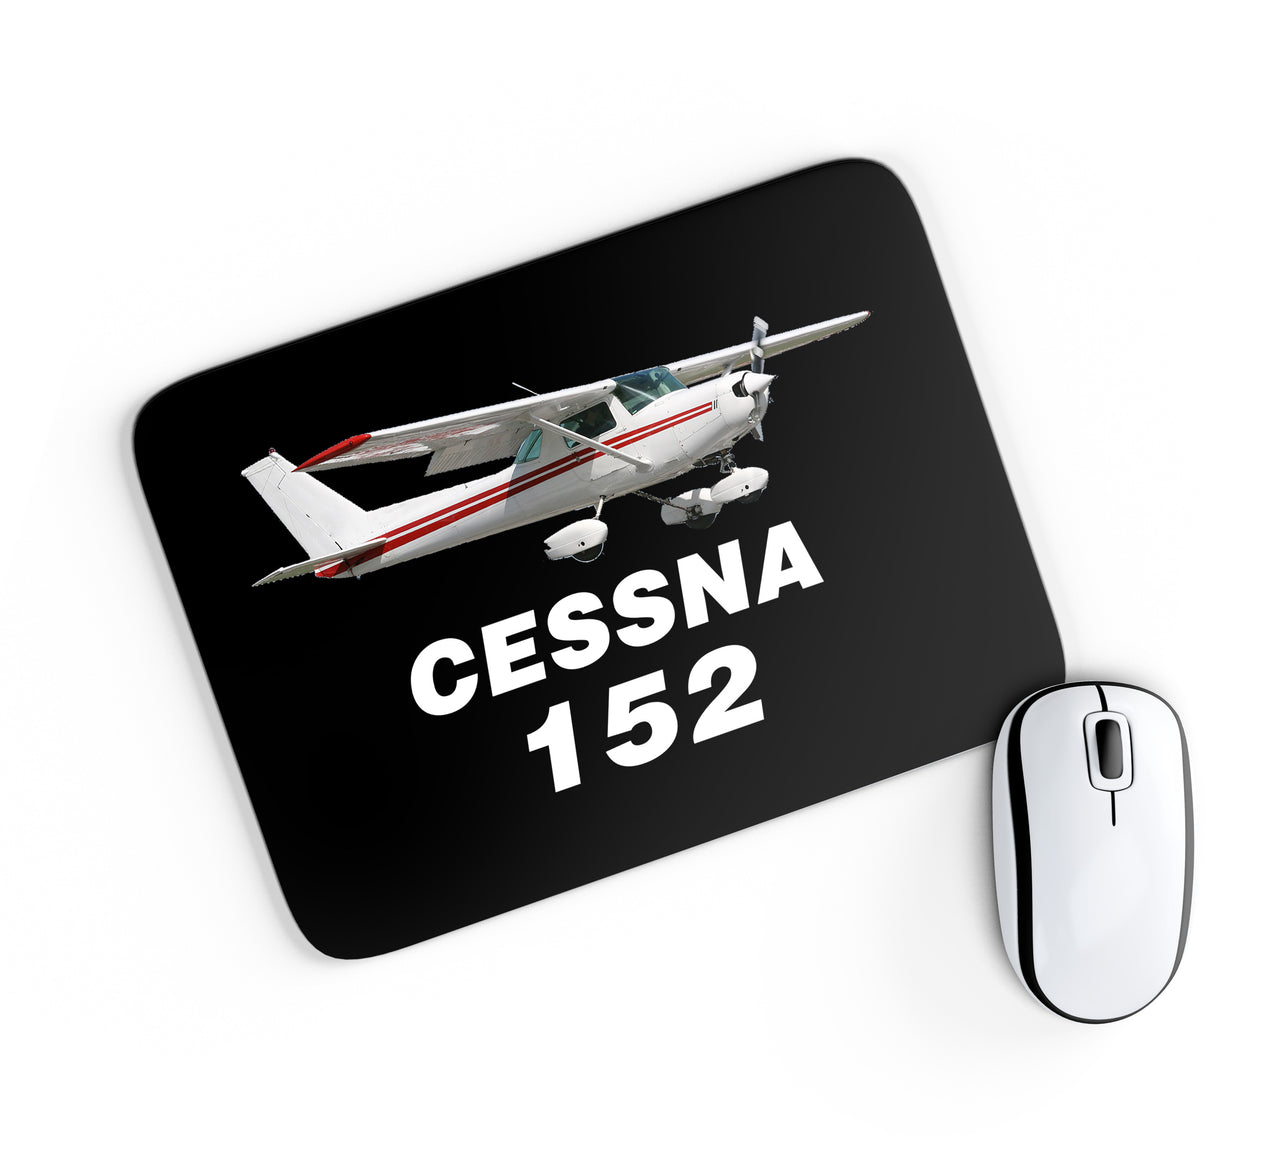 The Cessna 152 Designed Mouse Pads